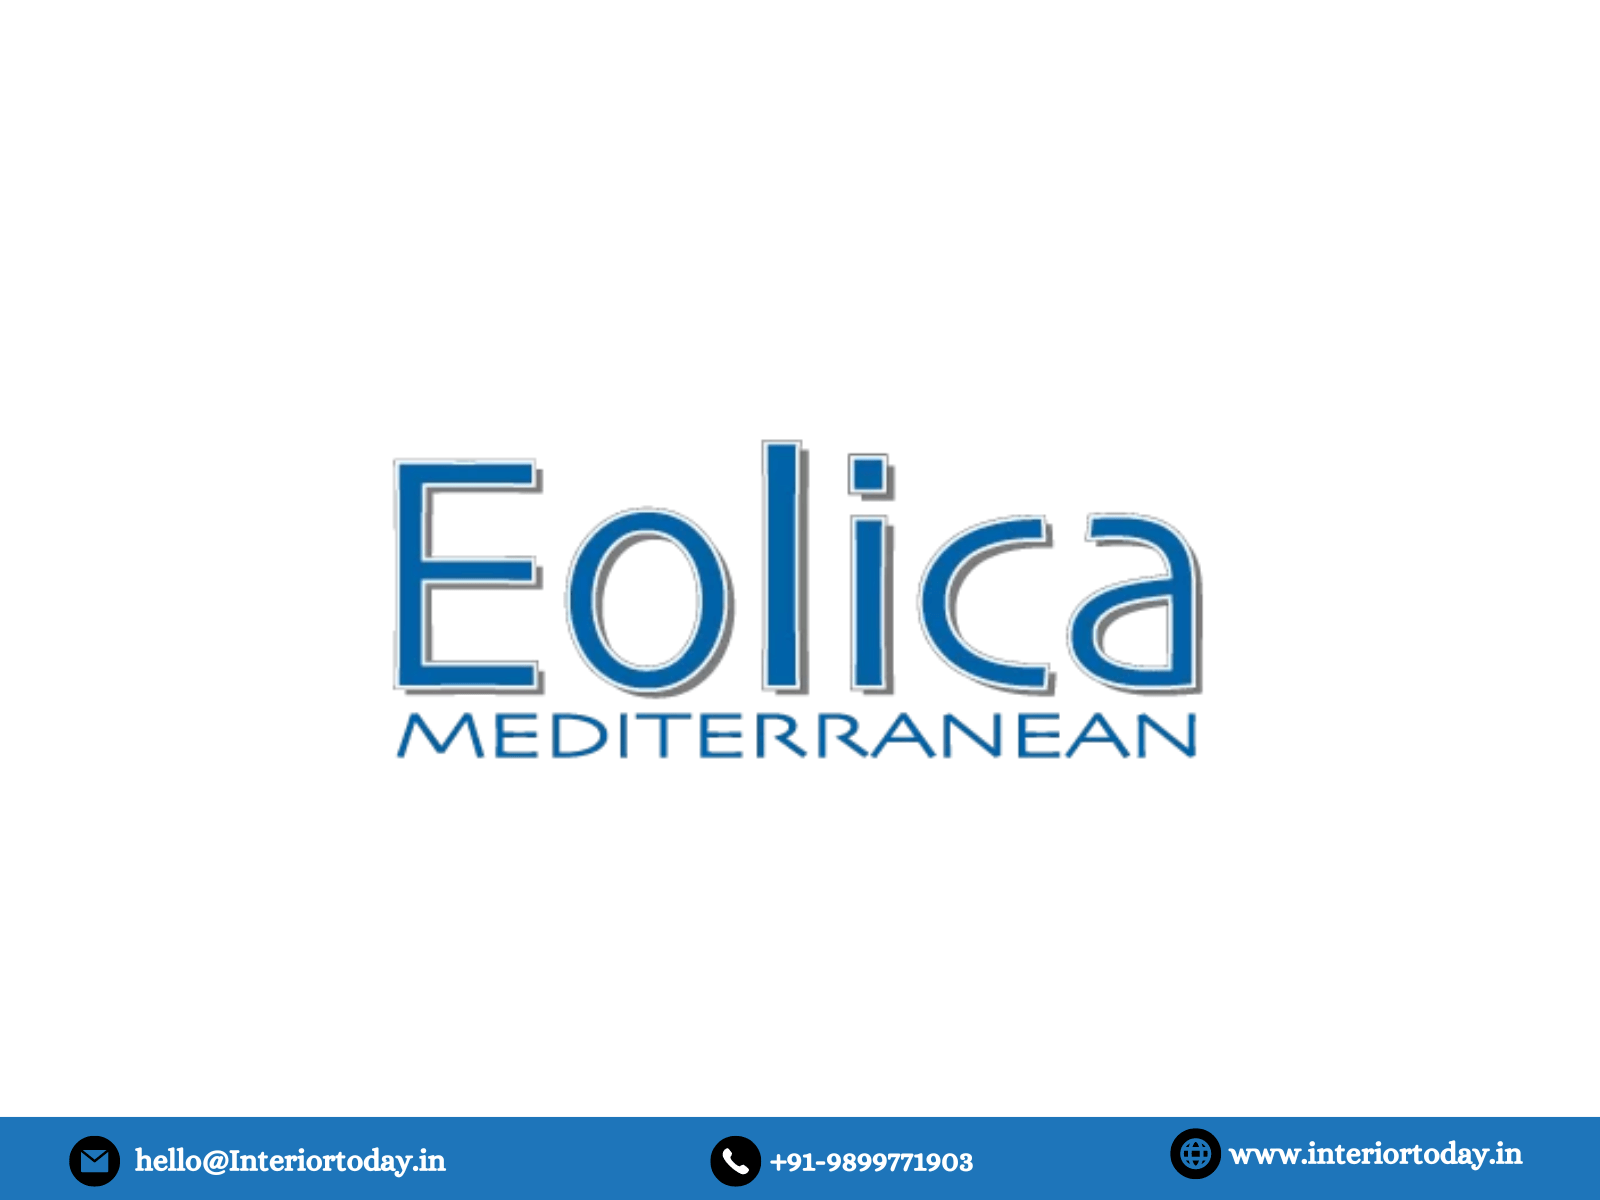 eolica-stand-designer-and-builder-interior-today-exhibition